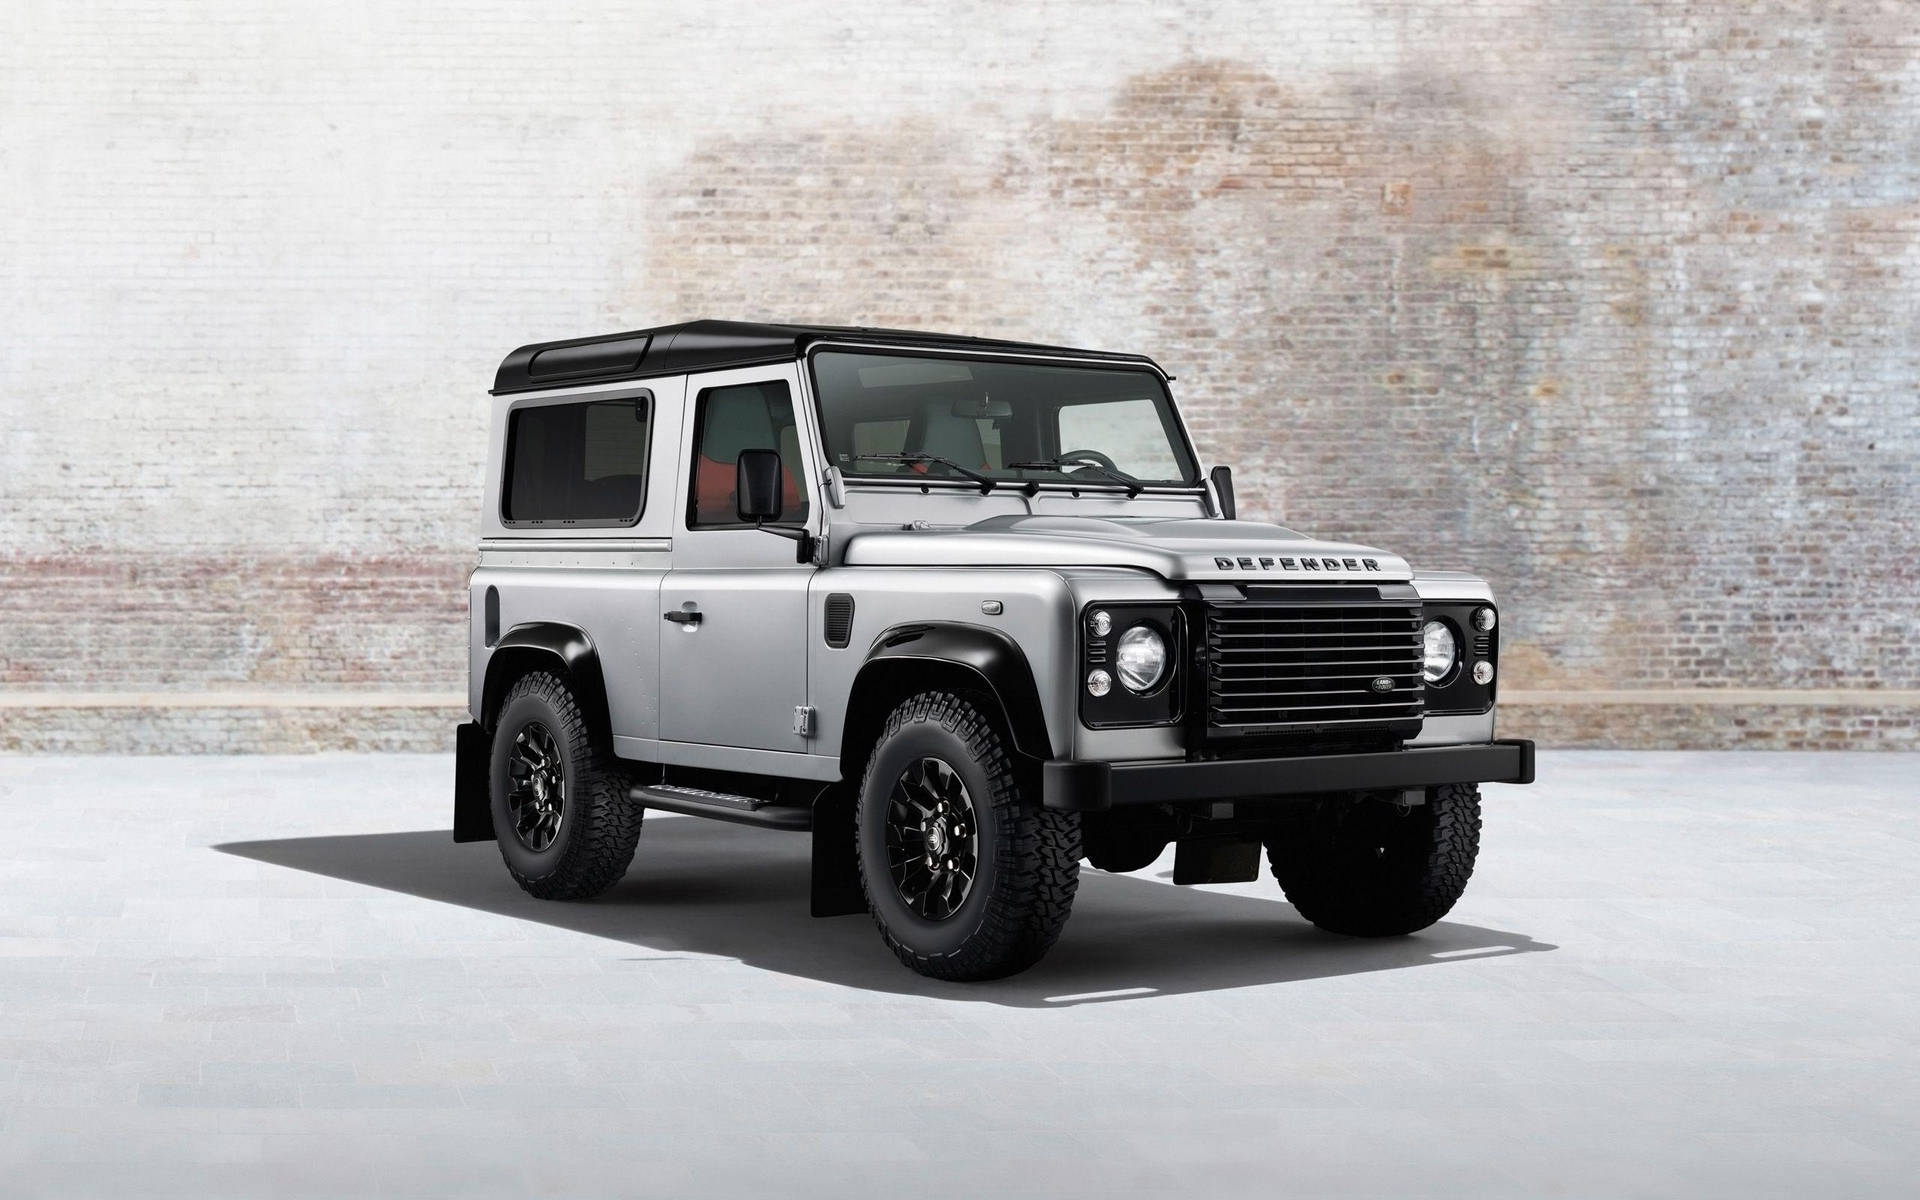 Classic Land Rover Defender Background